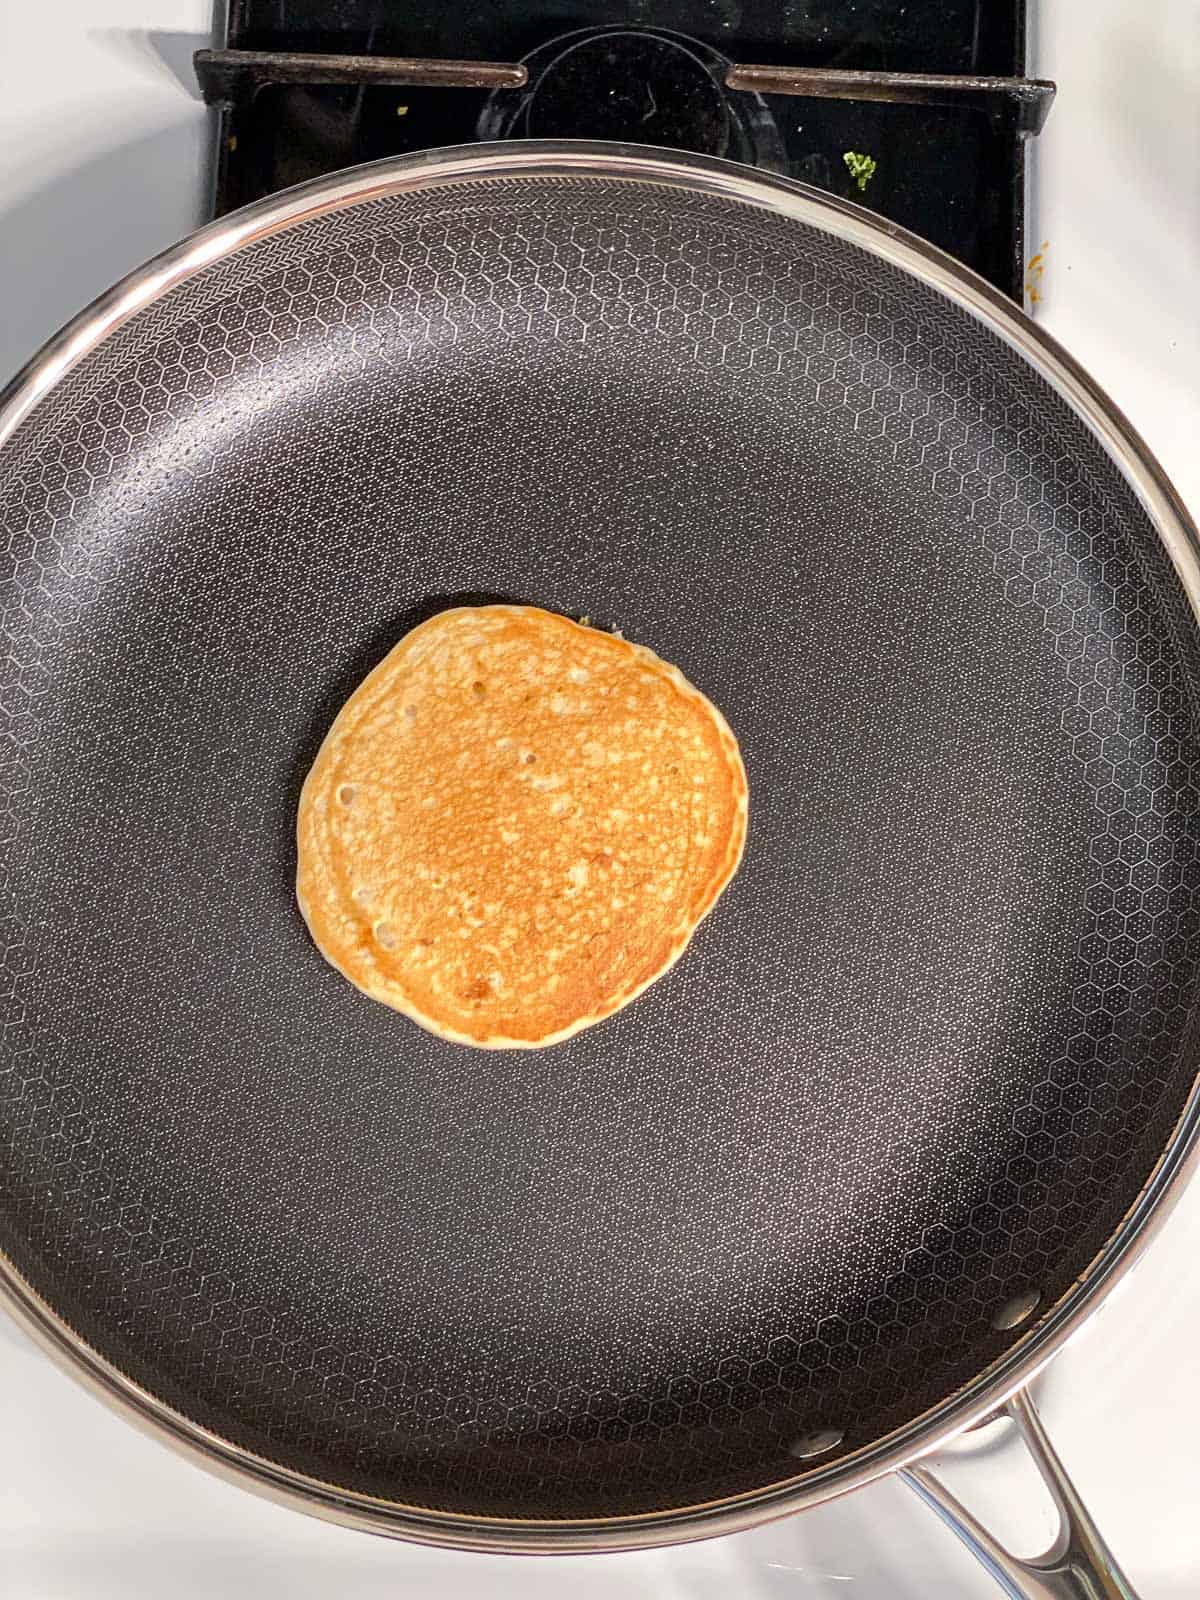 process s،t s،wing flipped pancake on a s،et